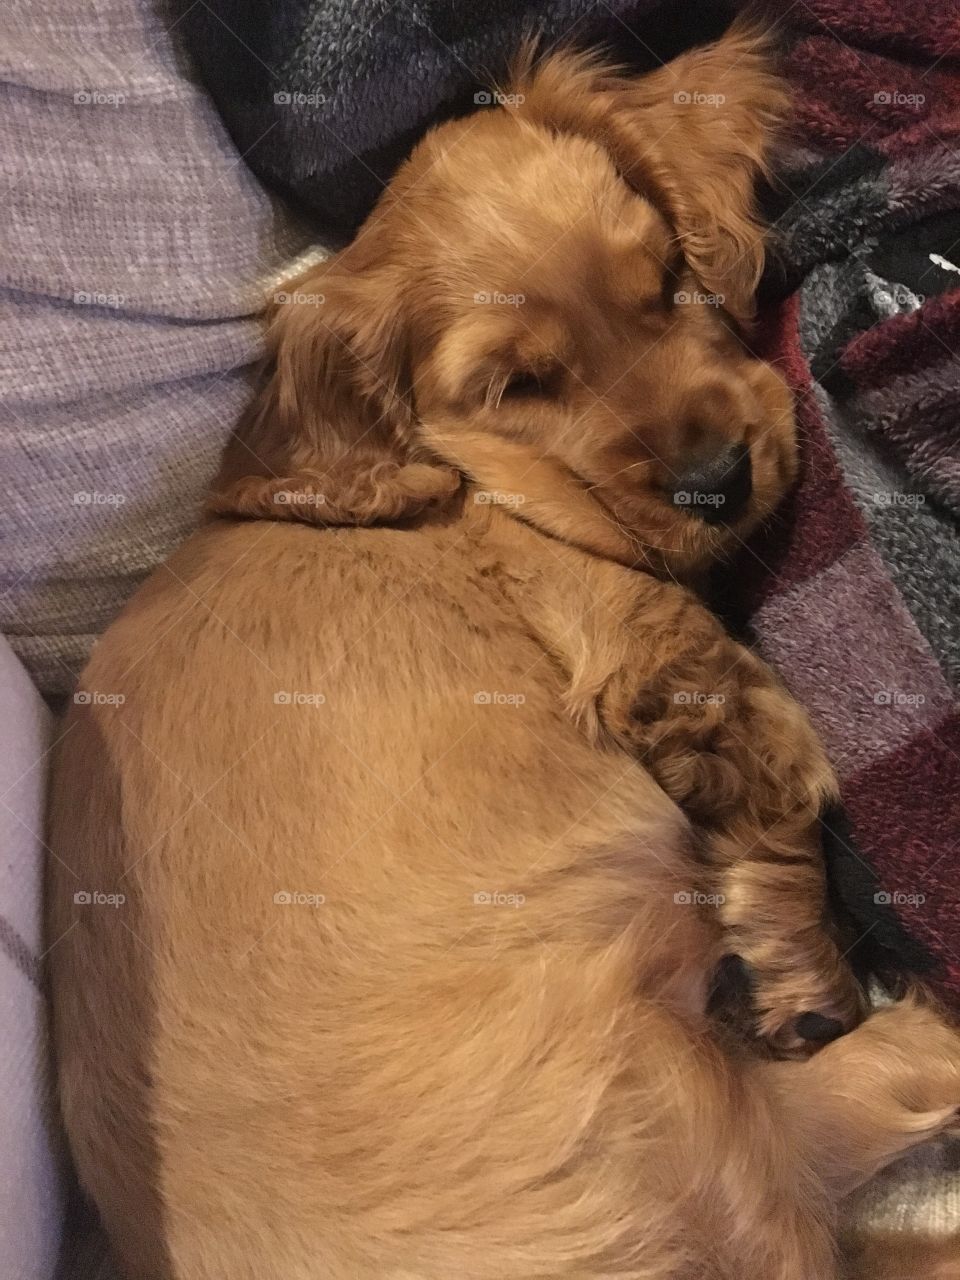 Squishy face! Sleeping cocker spaniel with his human.